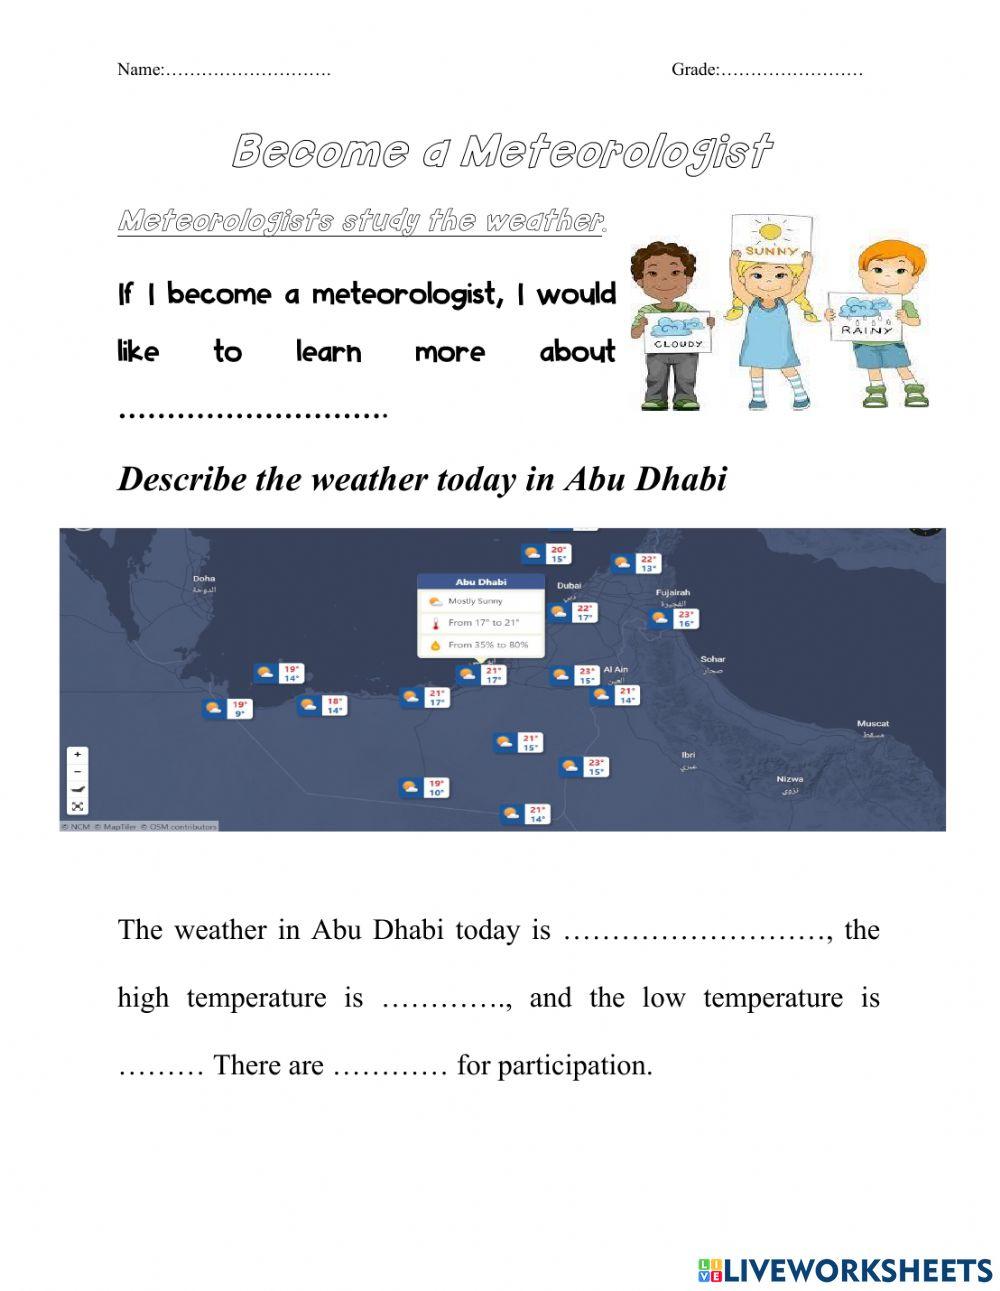 Become a Meteorologist